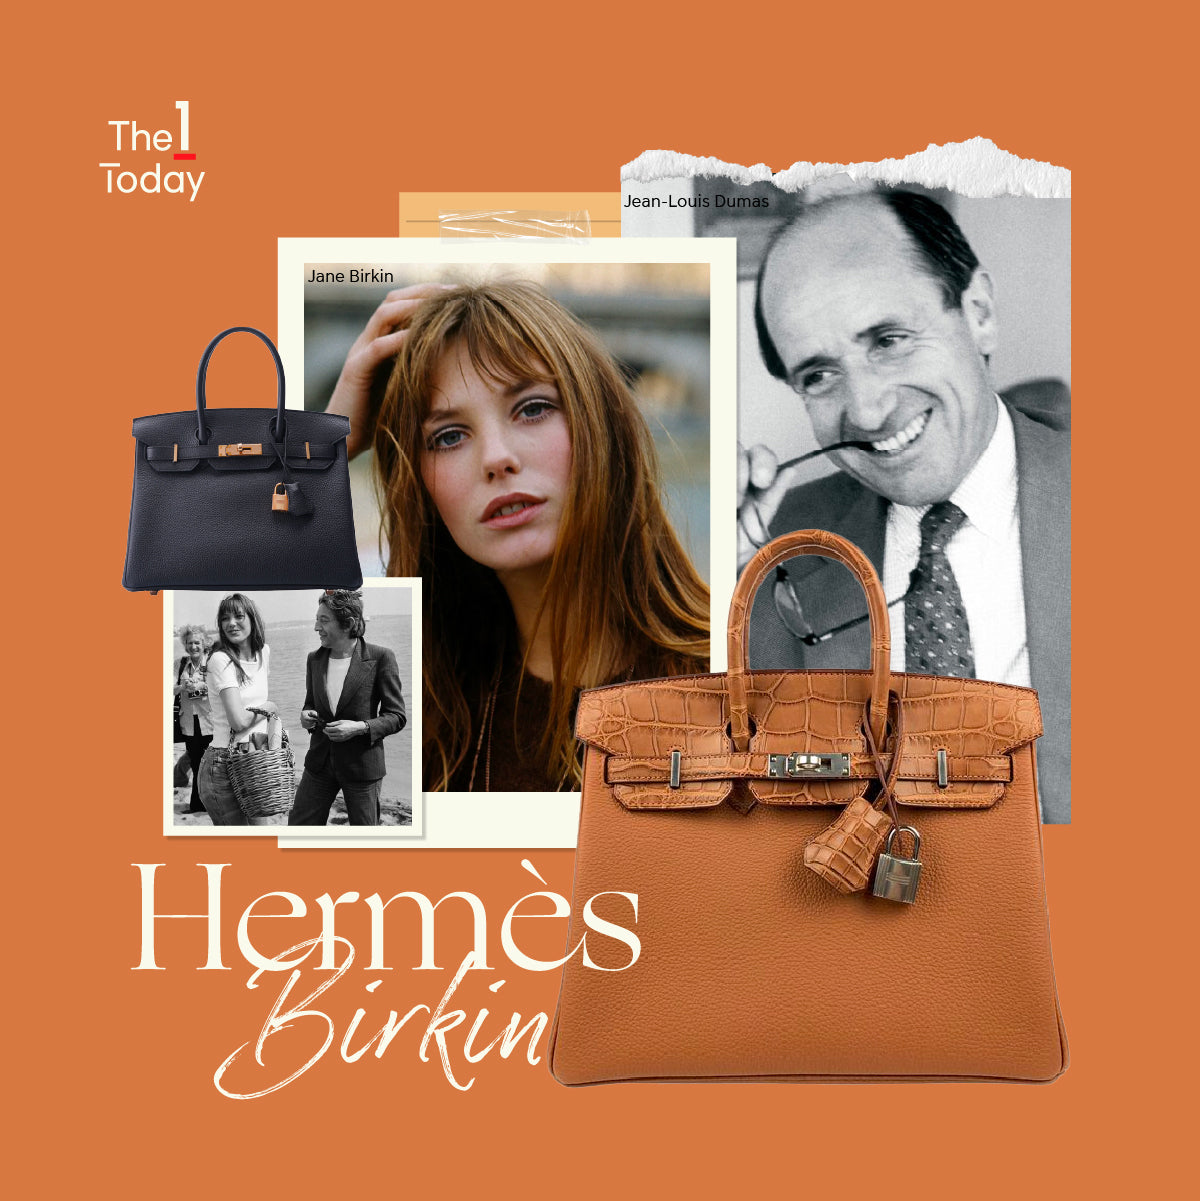 Hermès In The Making' – An Insider's Look Into This Iconic Brand